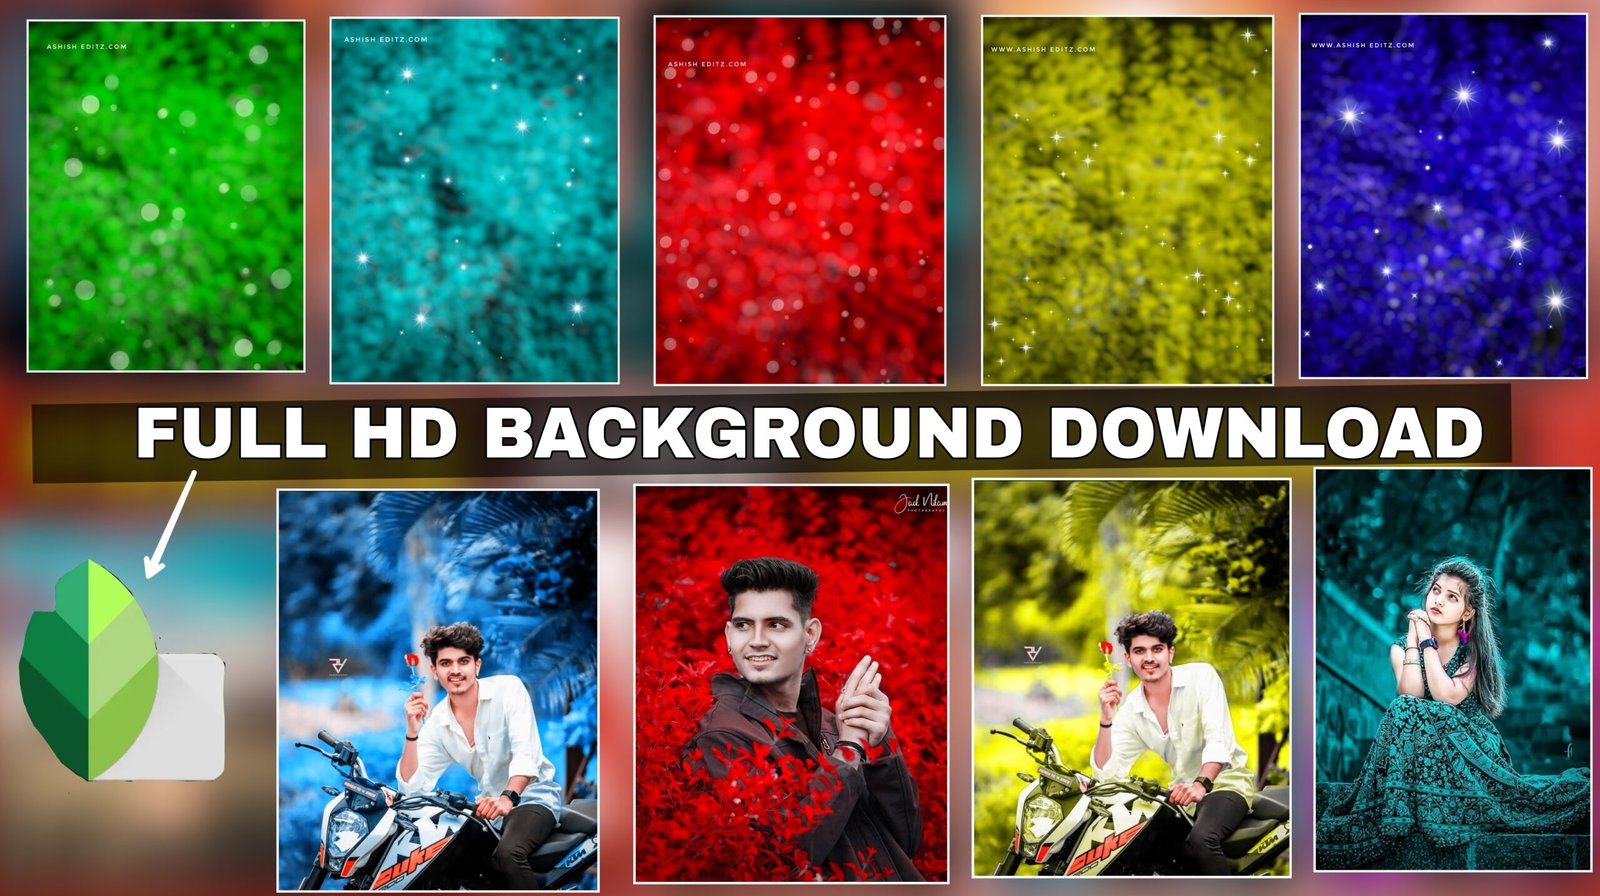 Snapseed cb backgroud download and snapseed photo editing tutorial